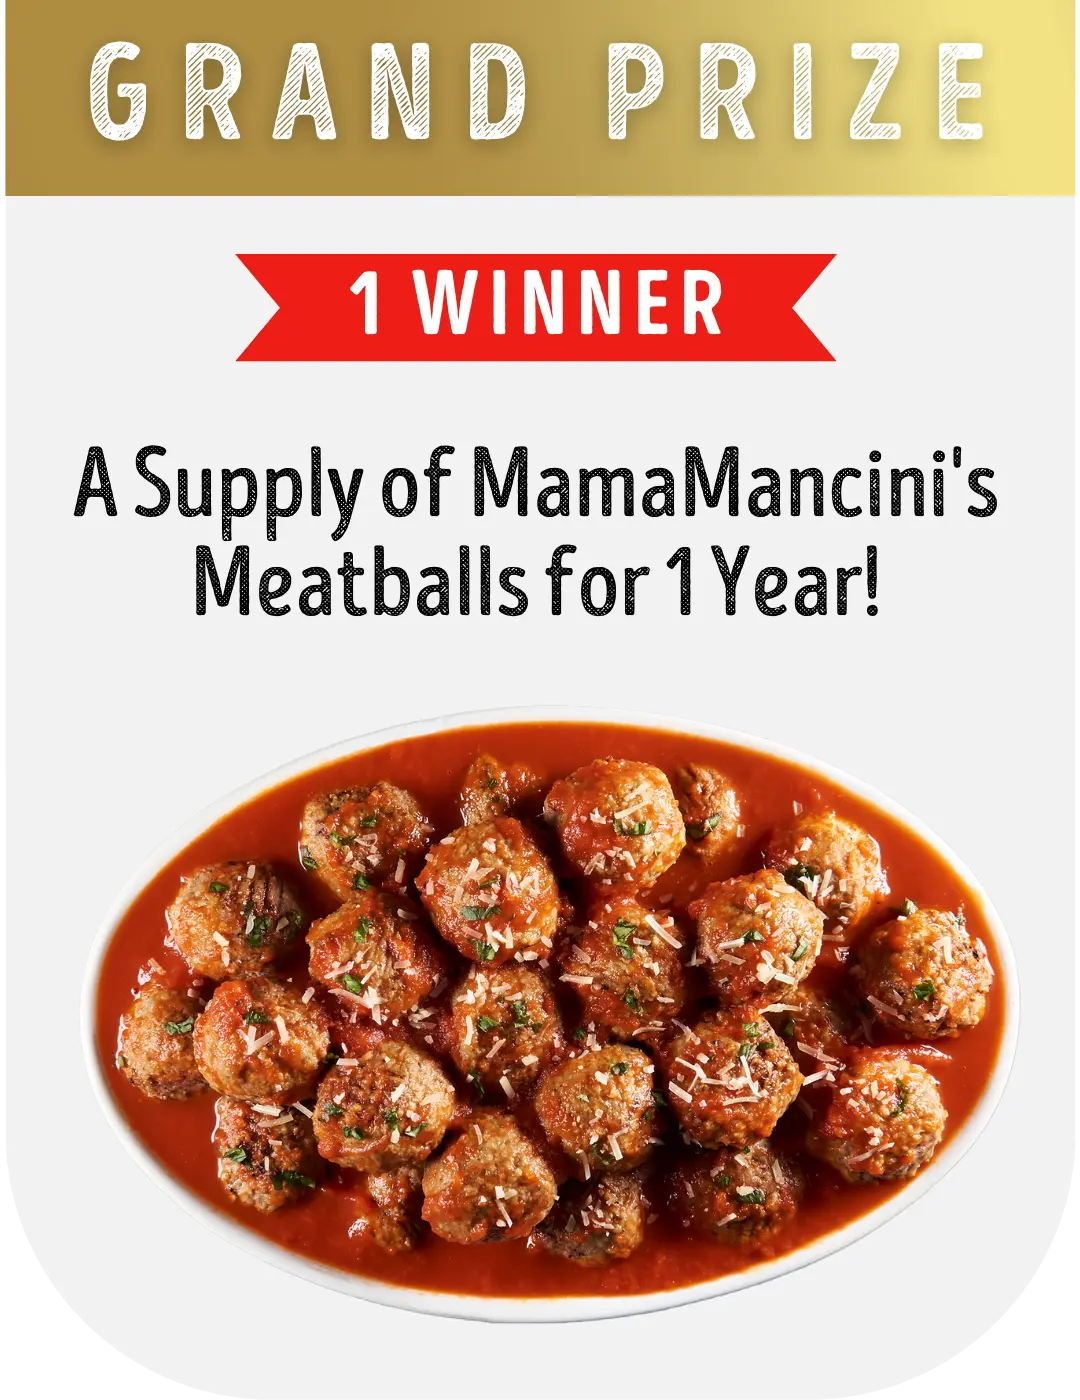 MM National Meatball Day Giveaway Prizes_Grand Prize.webp__PID:ea84d850-2f08-4b2c-9a1c-013a91339540